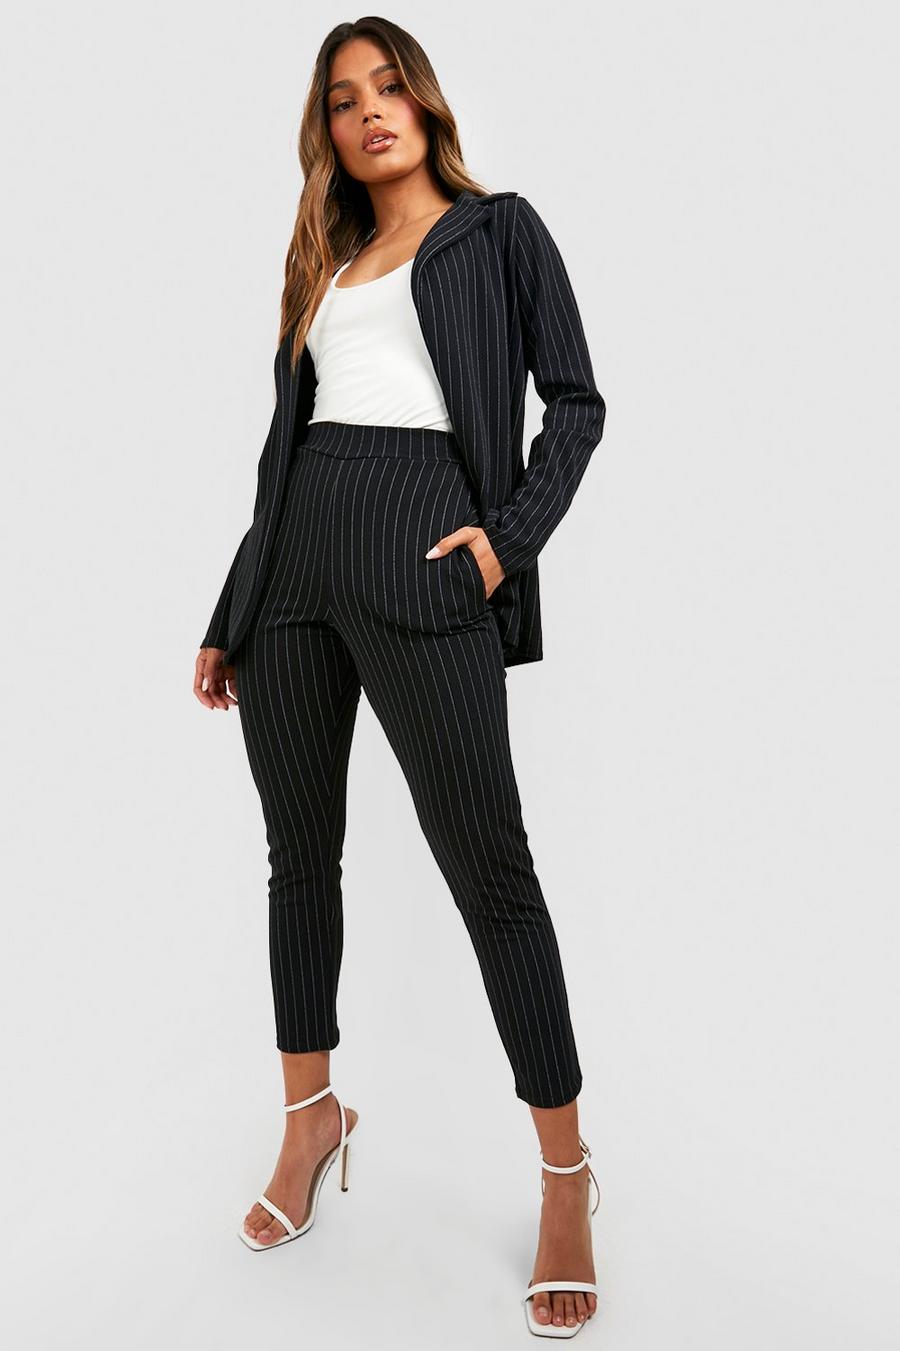 Black Pinstripe Tailored Blazer And Trouser pleated Co-Ord Suit